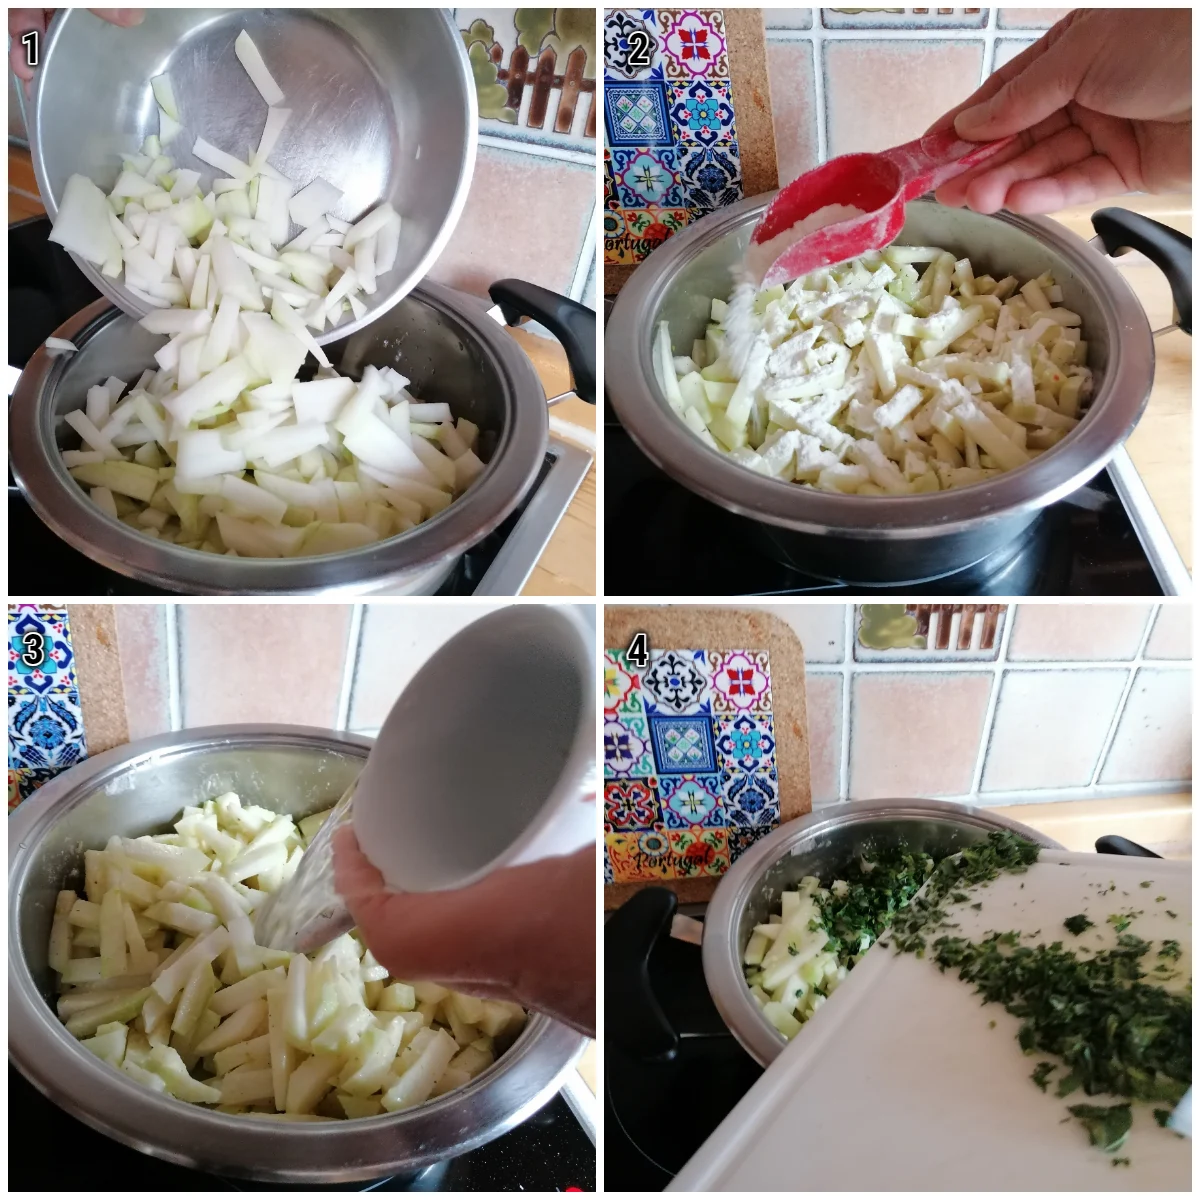 To to cook cabbage turnip